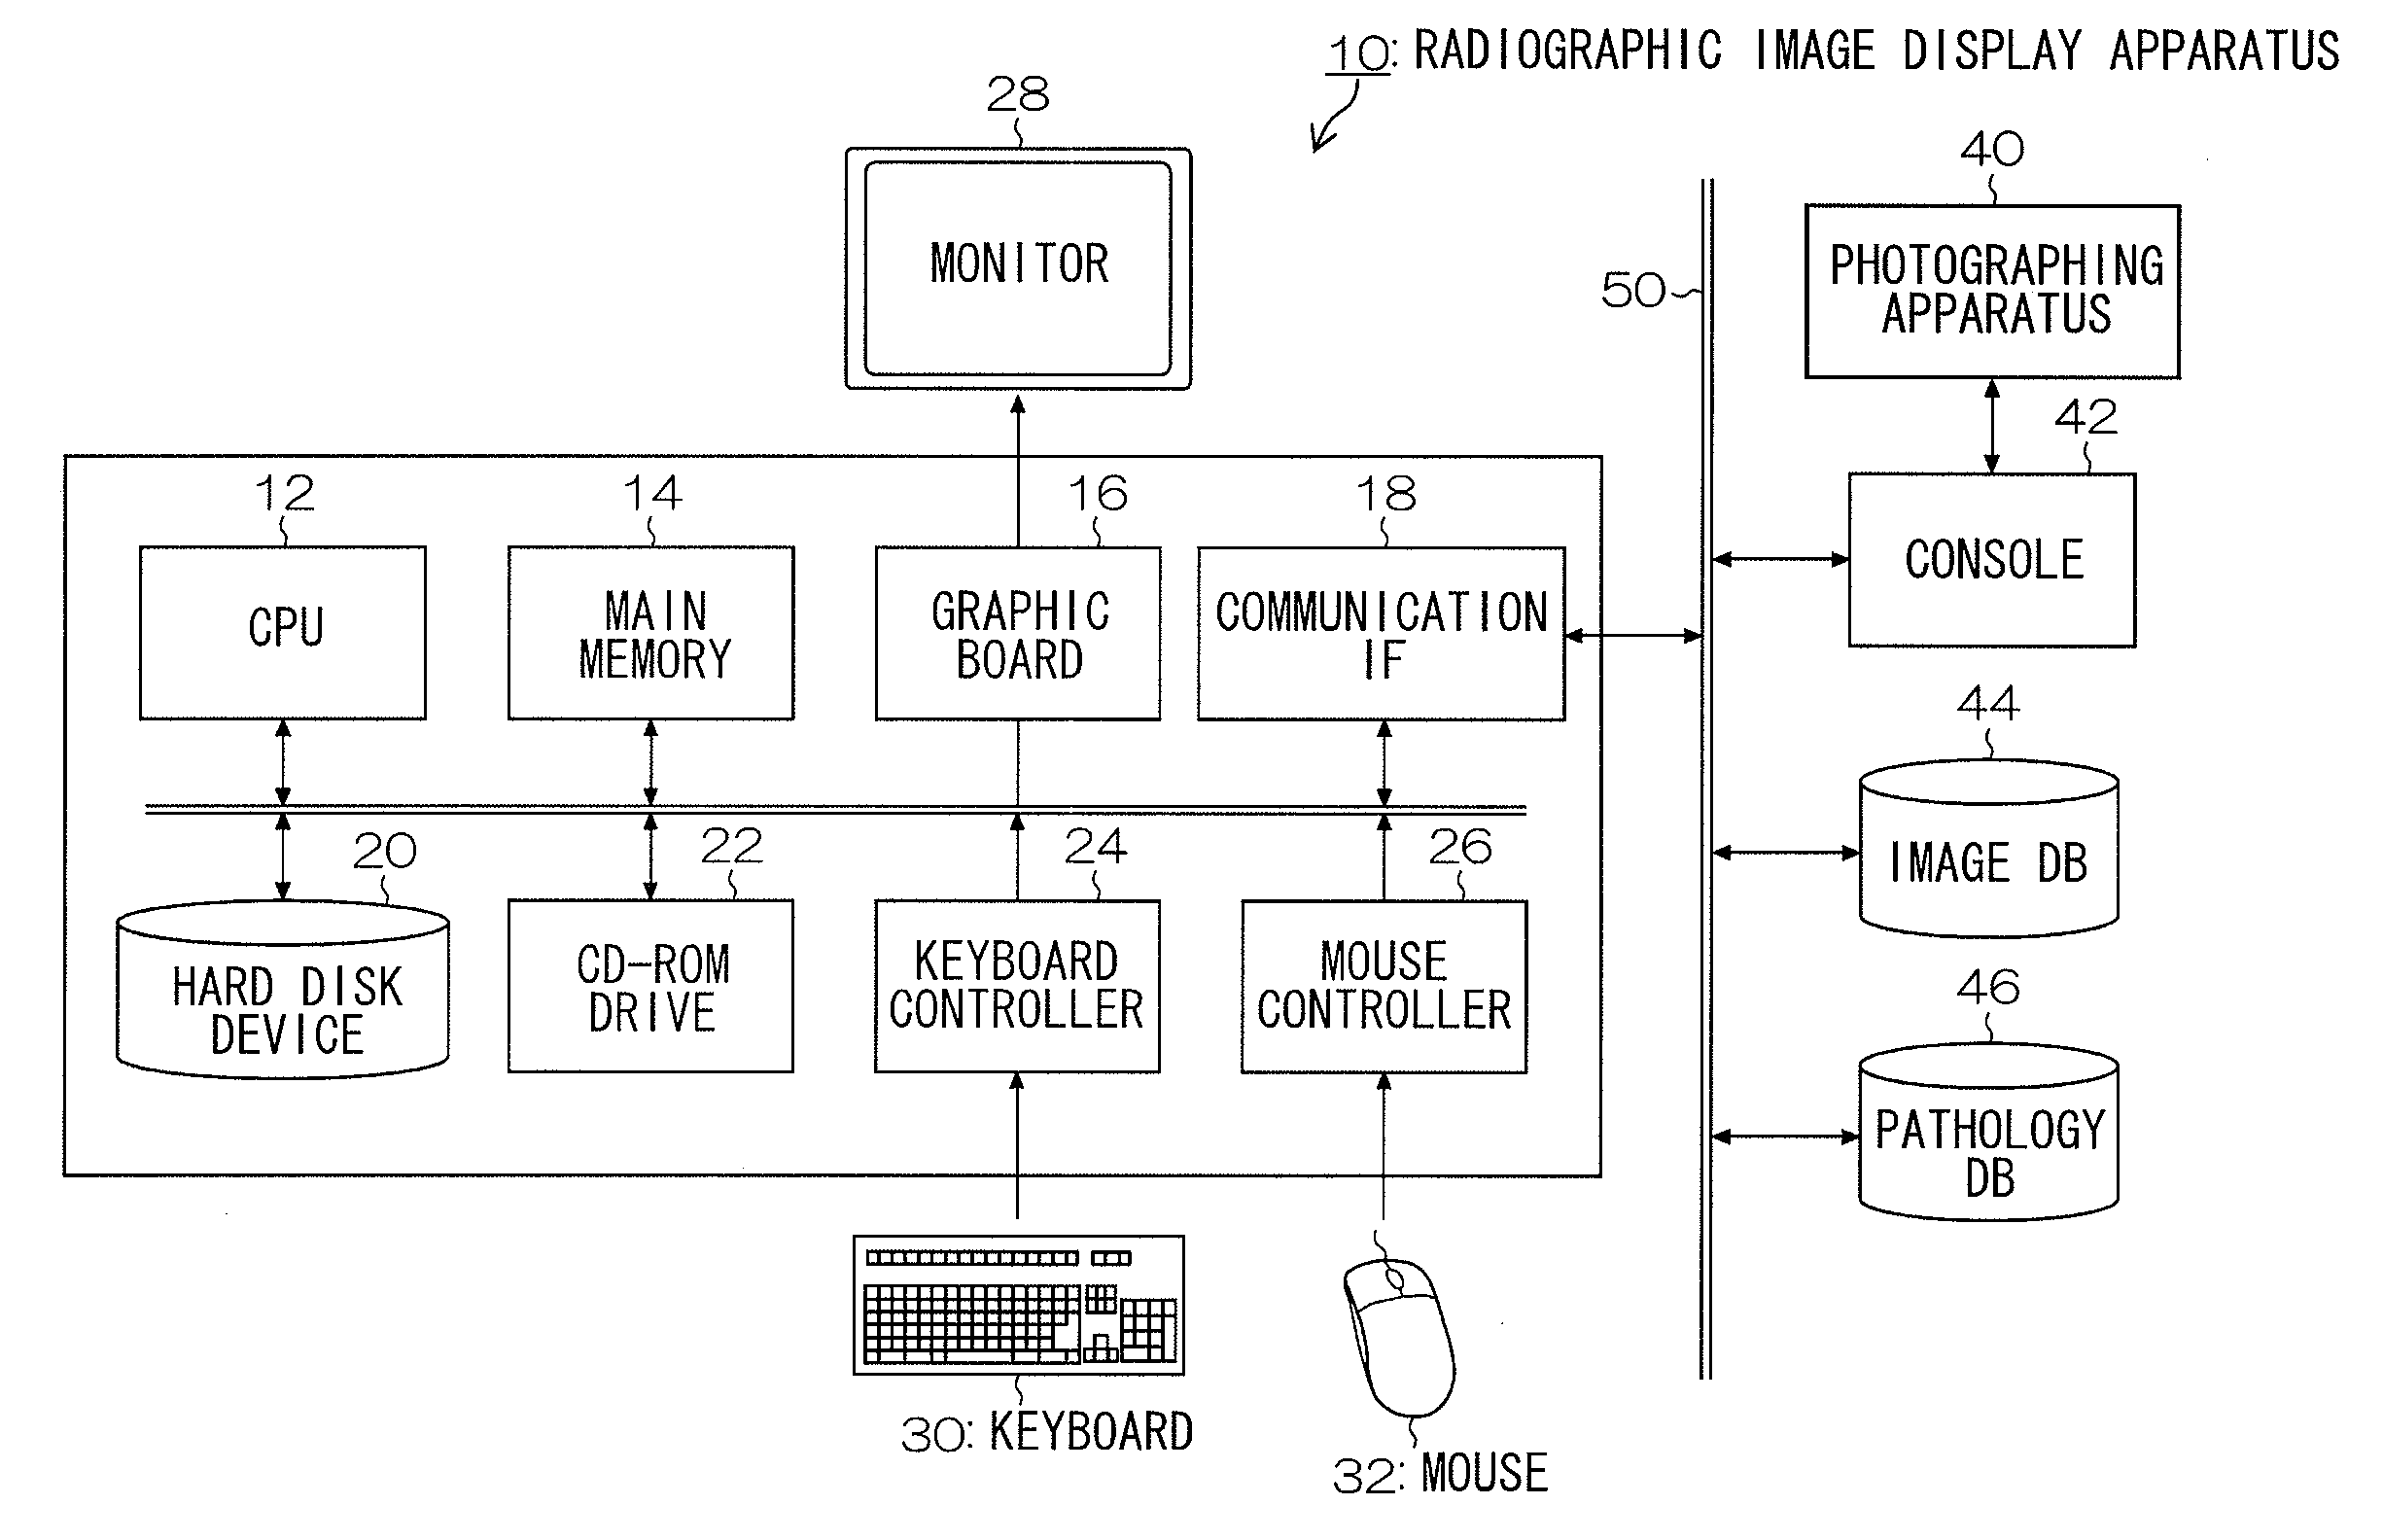 Radiographic image display apparatus, and its method and computer program product